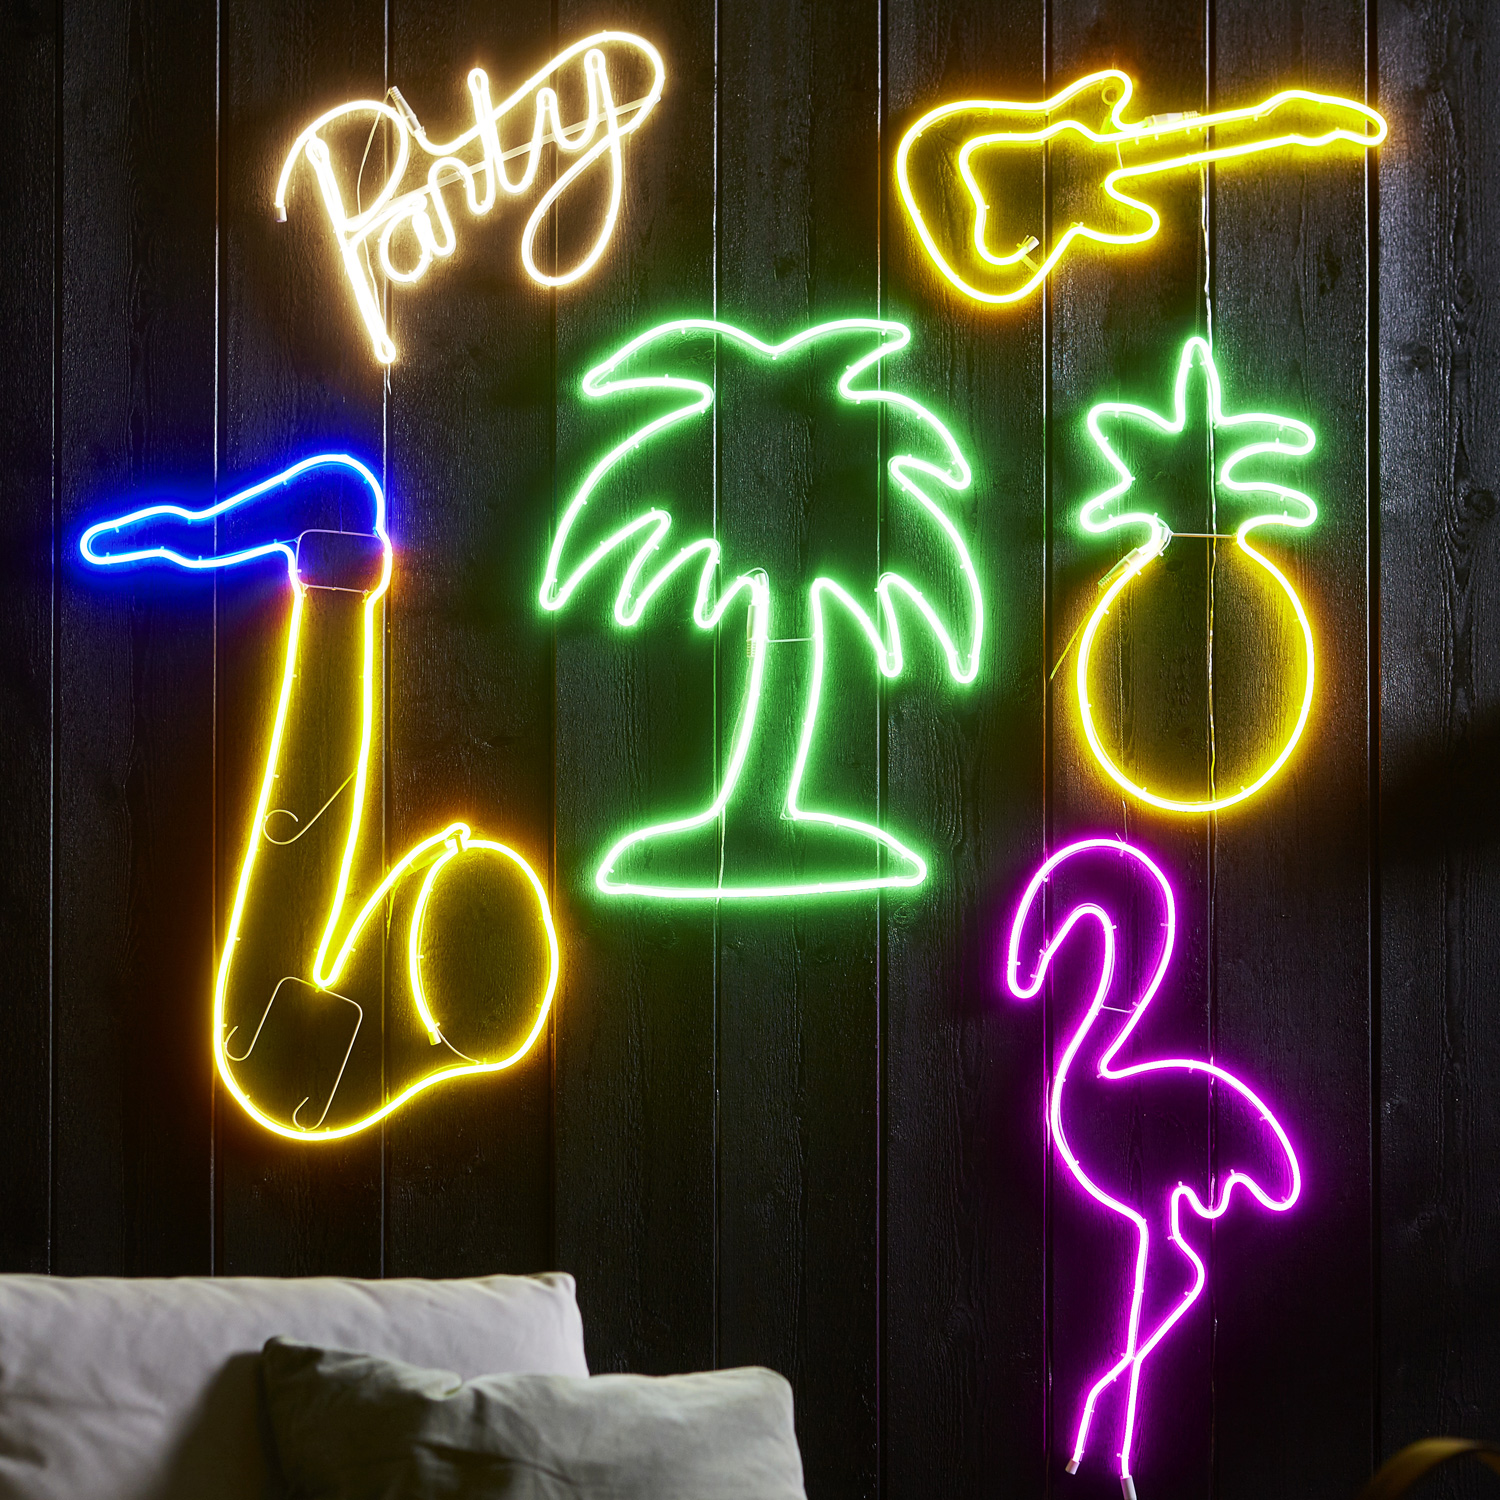 LED Silhouette "Party" - Flatneon - 305 LED - H: 31cm - outdoor - warmweiß